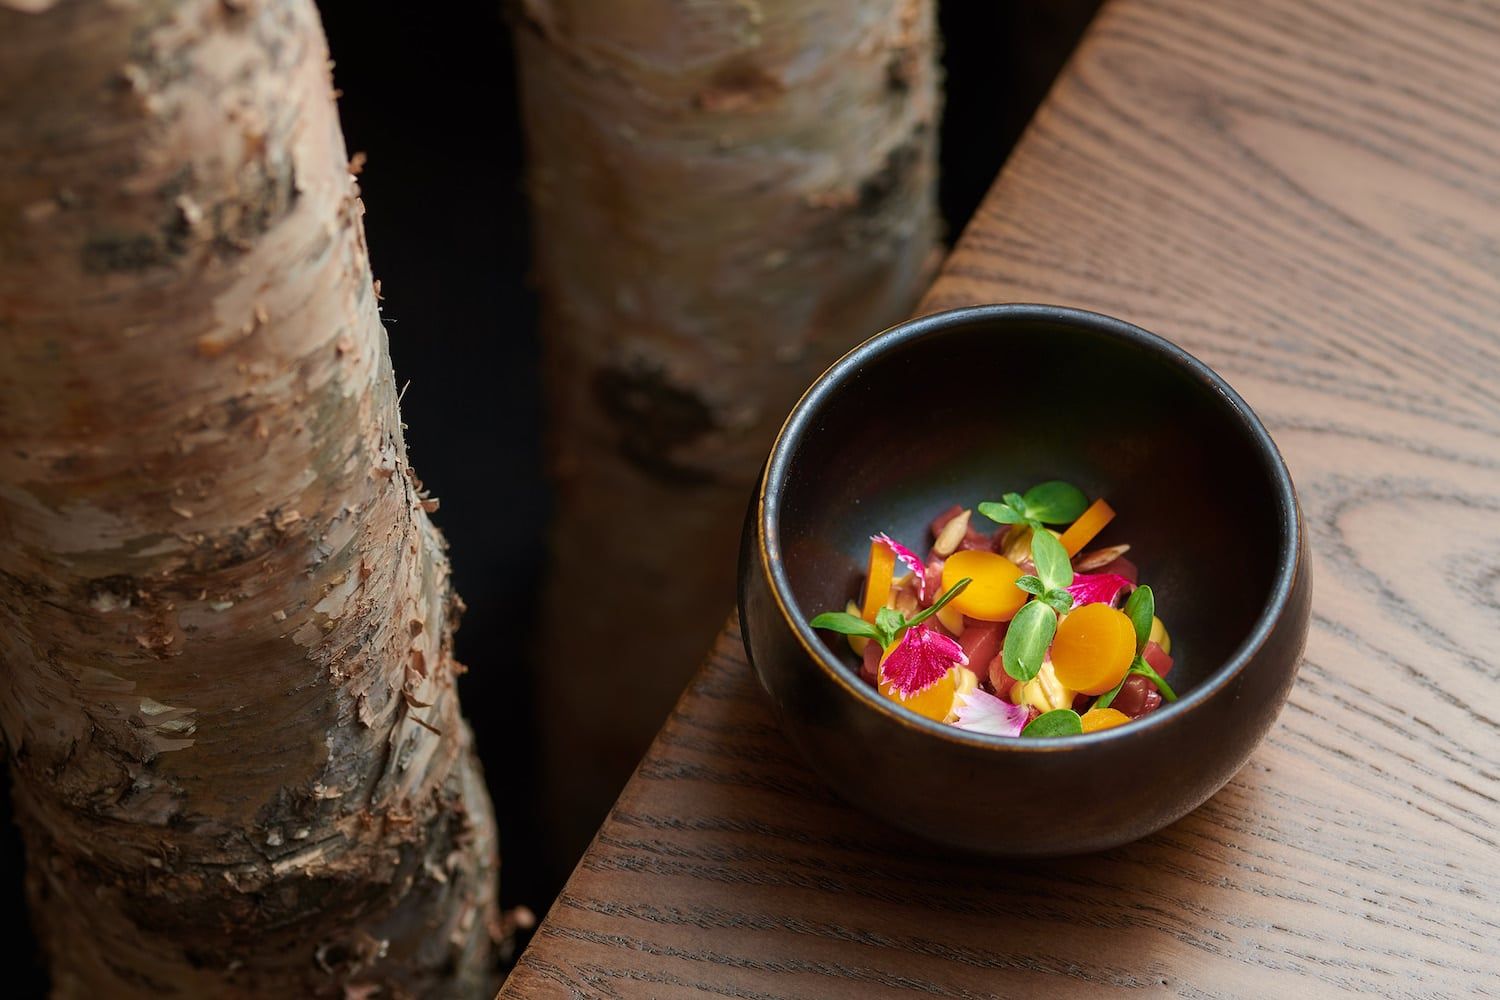 First look: Roganic’s farm-to-table fare is an exciting evocation of Earth’s bounty